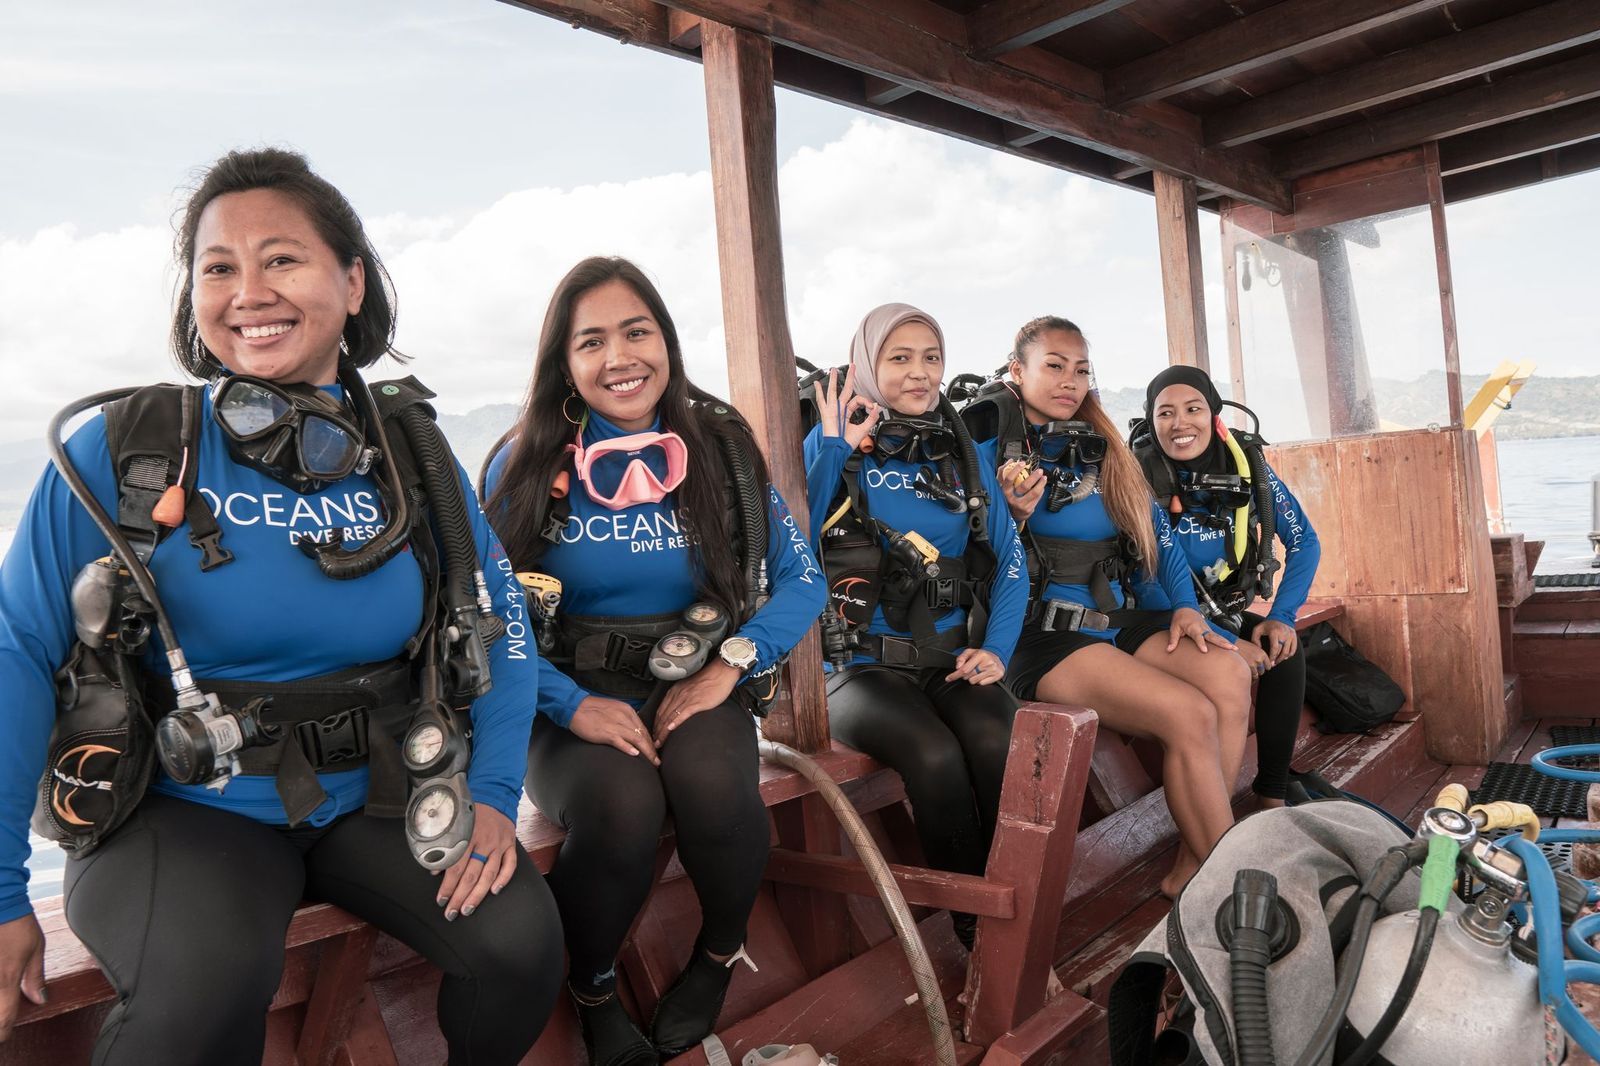 Women receive education and support to safeguard Indonesia’s coral reefs